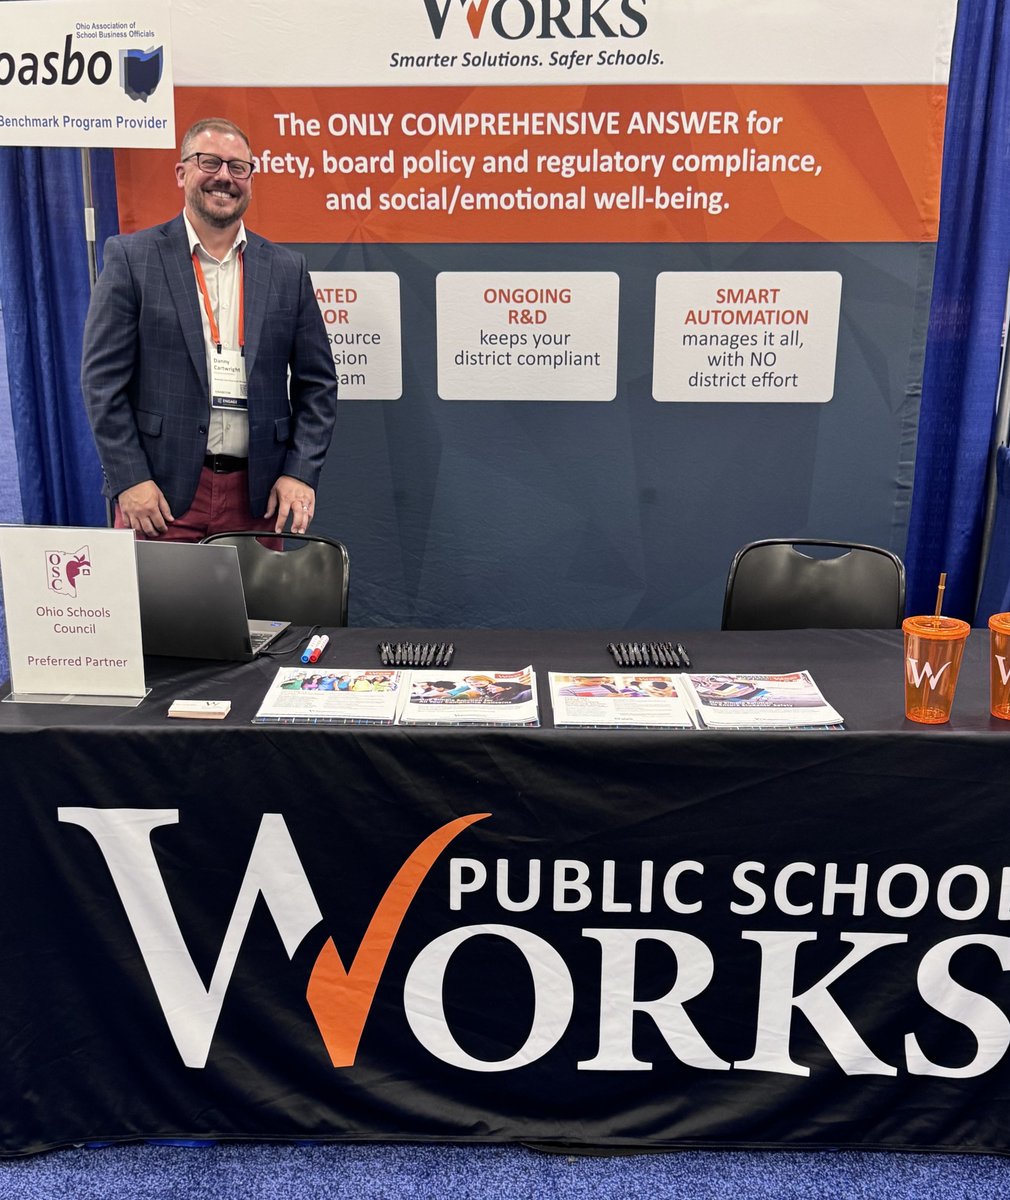 If you're at the @oasbo Expo today, come see us at booth 117! We have new training and program add-ons to help you stay compliant with Ohio HB 33, Erin's Law, and HB 123. #DoWhatWORKS